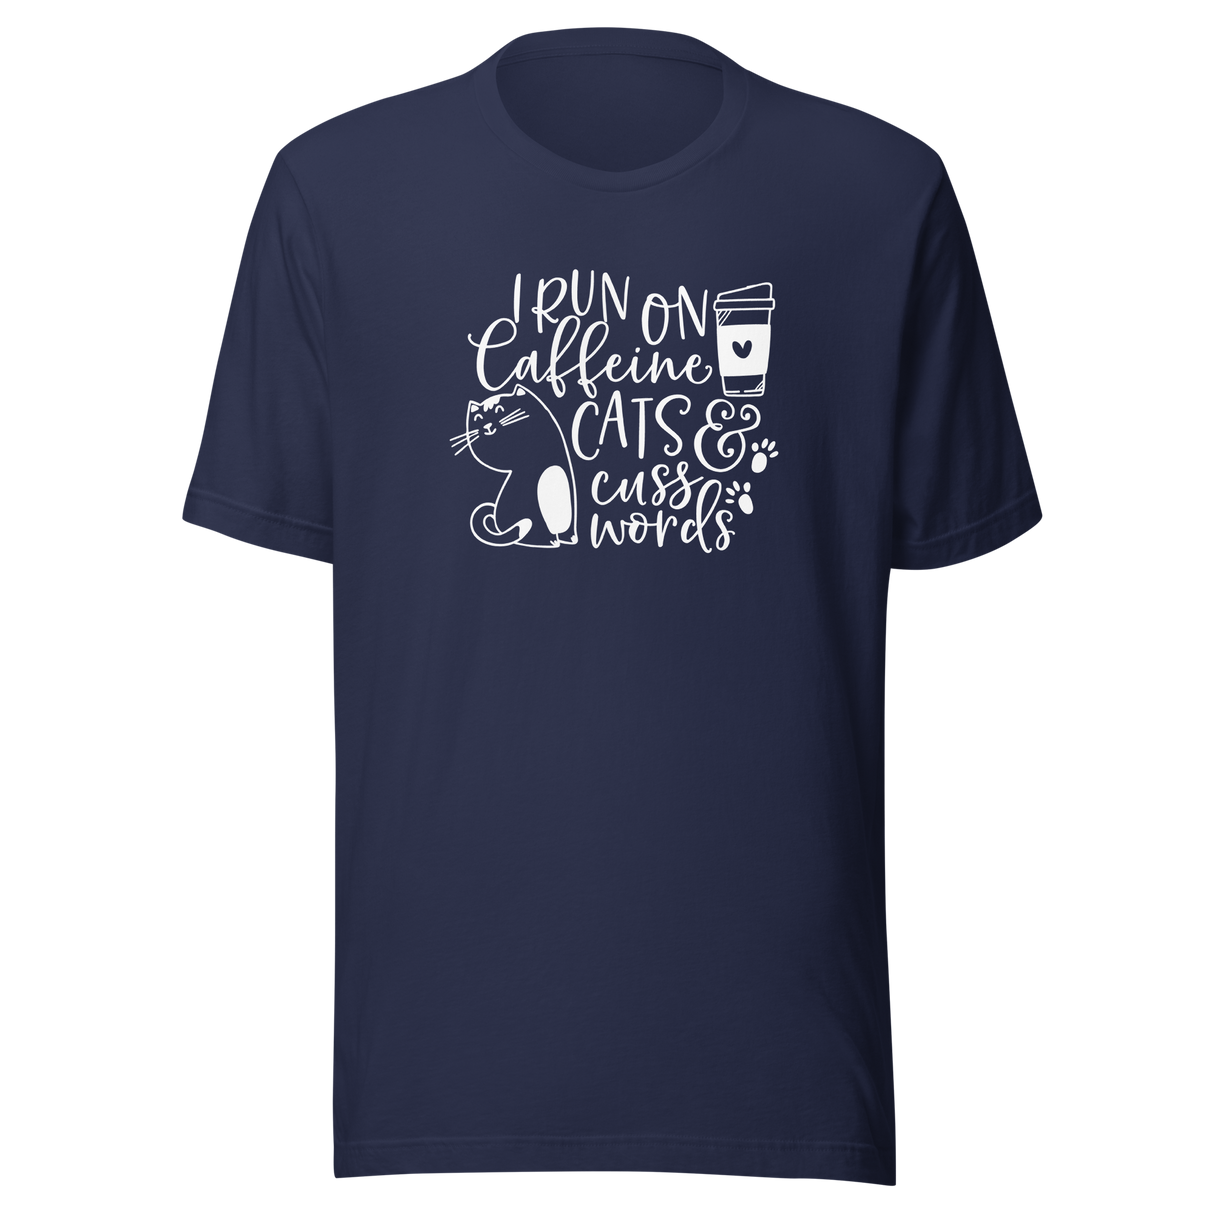 i-run-on-caffeine-cats-and-cuss-words-cat-lover-tee-coffee-t-shirt-cuss-words-tee-cat-lover-t-shirt-cat-mom-tee#color_navy